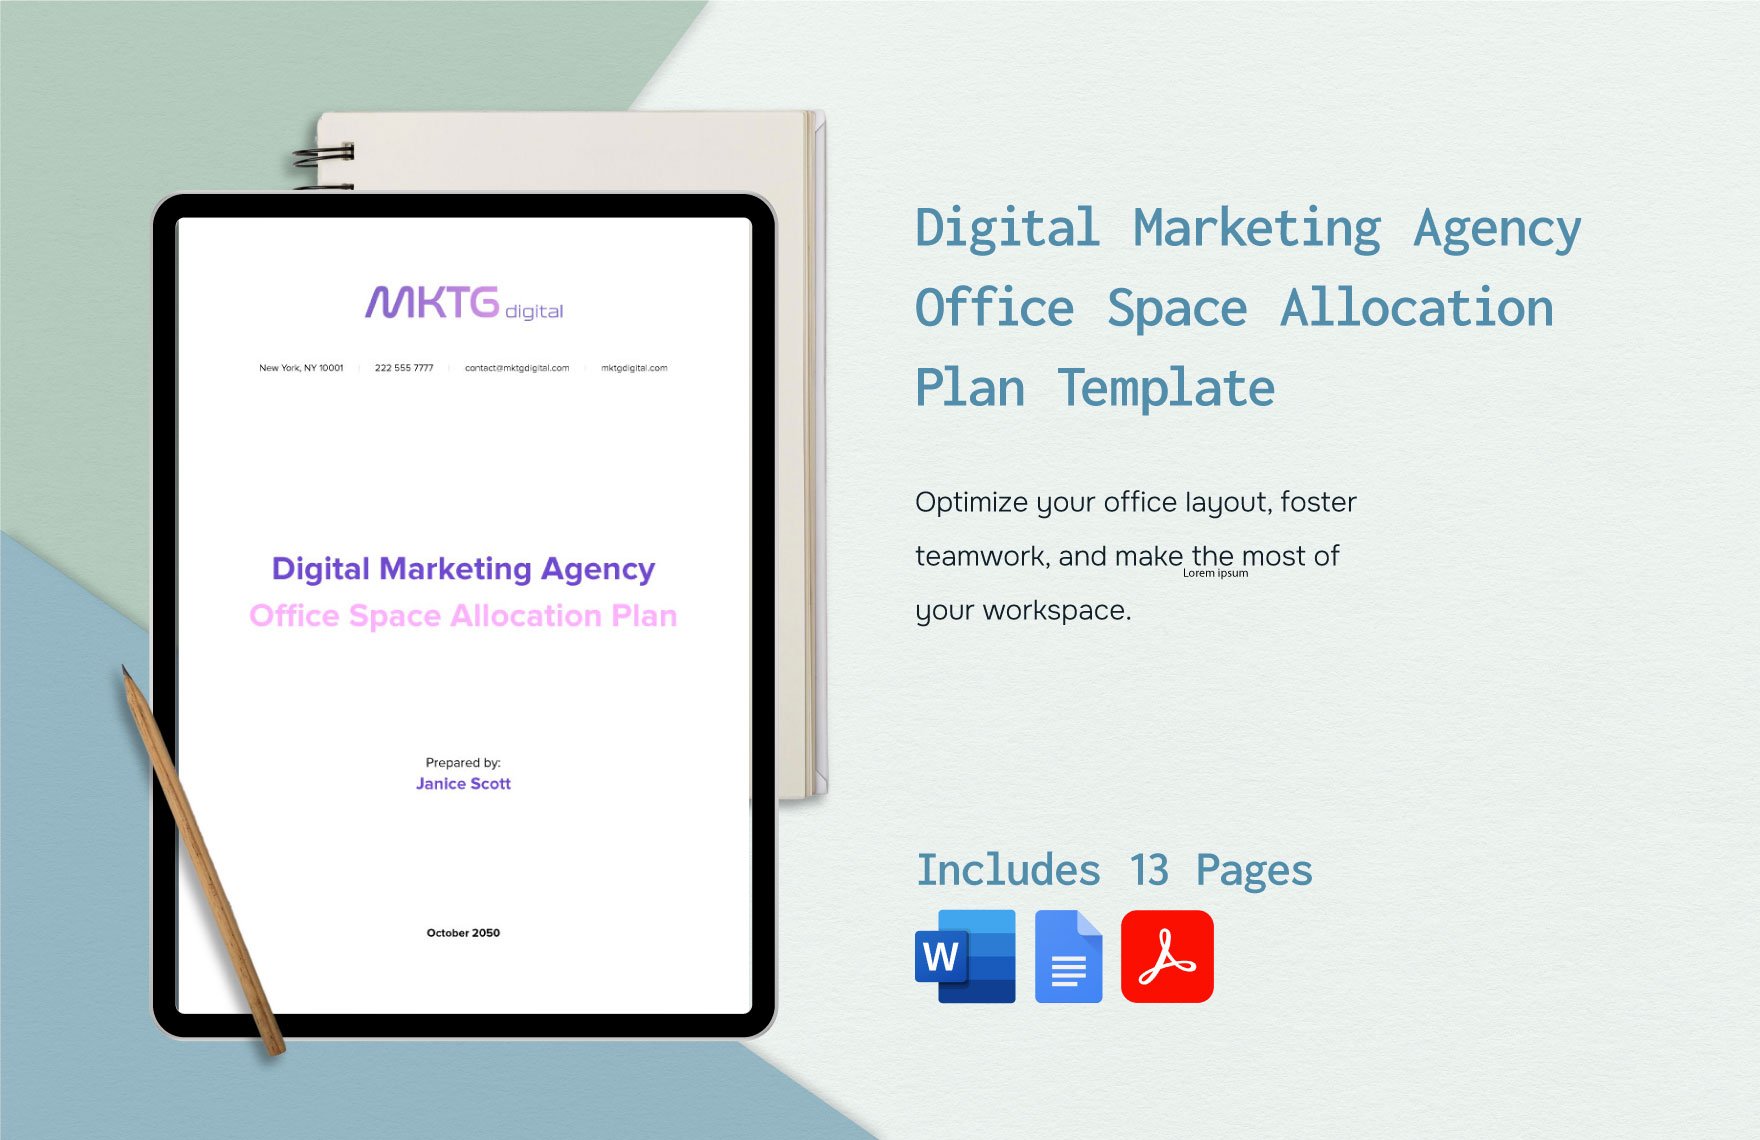 Digital Marketing Agency Office Space Allocation Plan Template